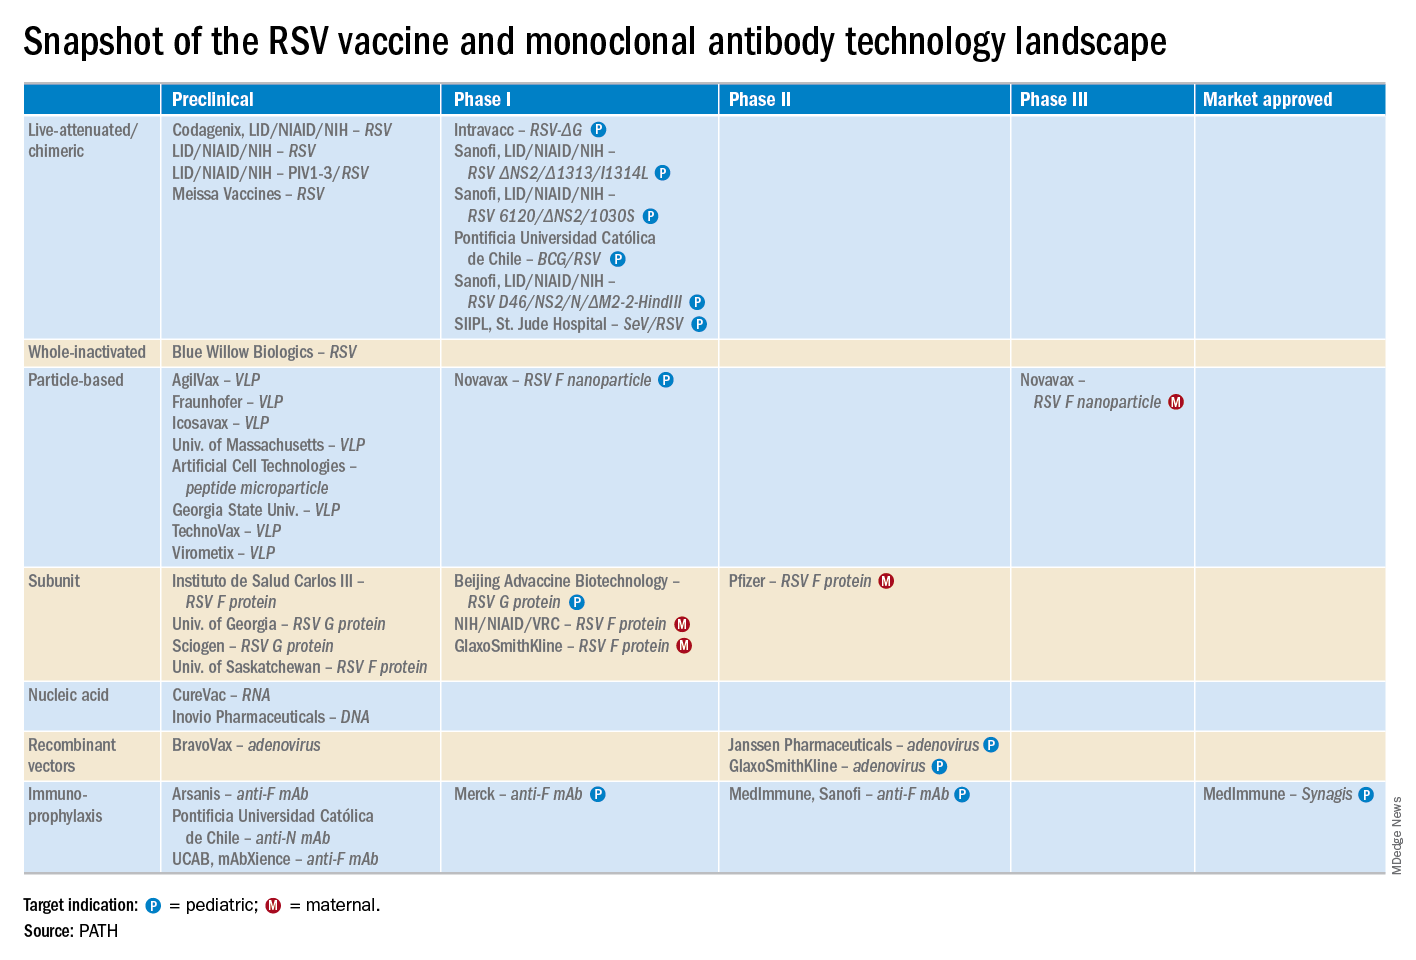 Snapshot of the RSV vaccine and monoclonal antibody technology landscape